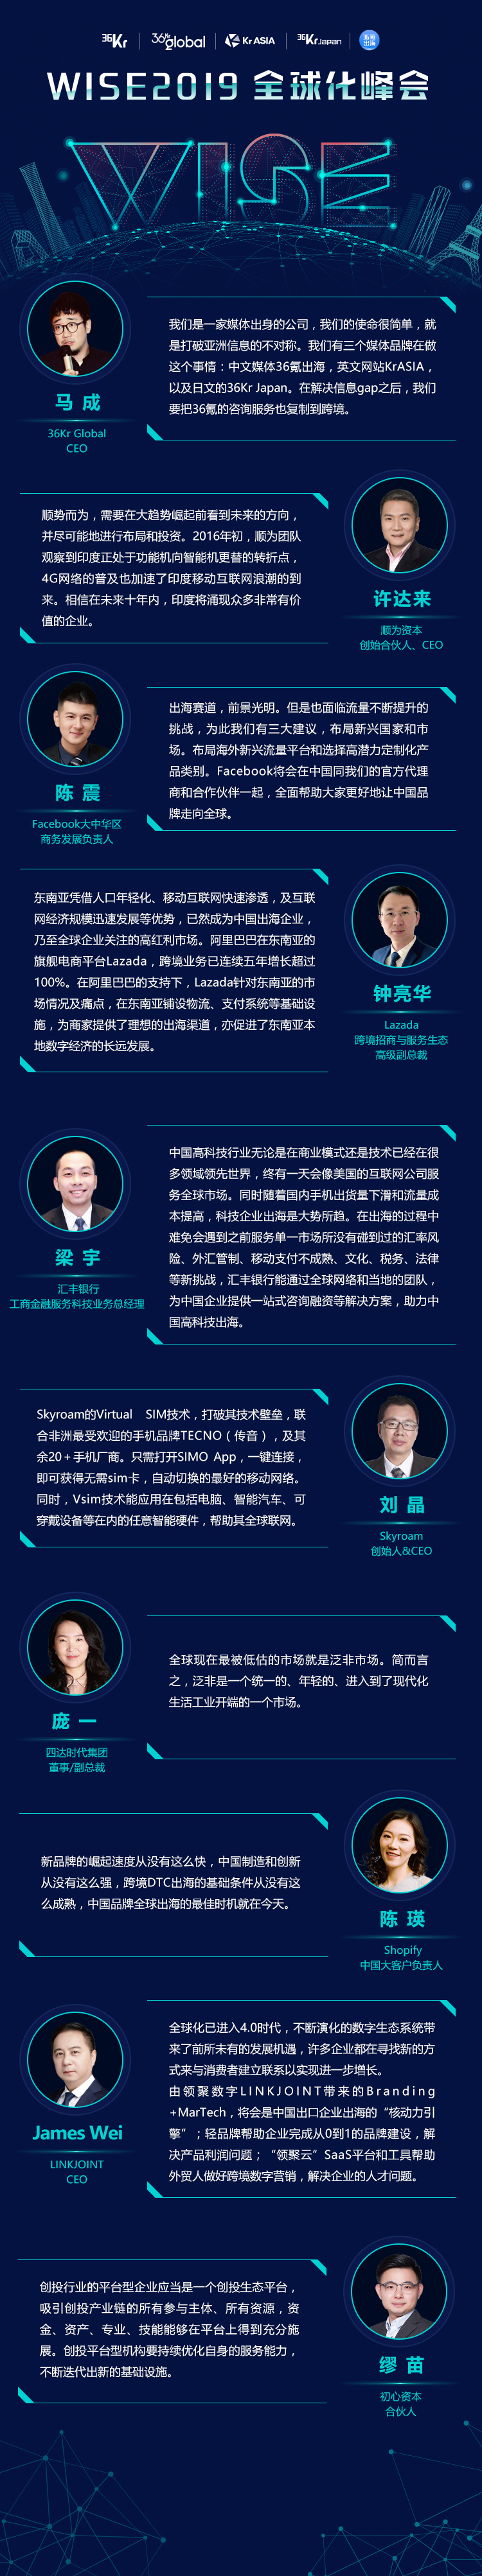 In the wave of globalization, the opportunities and challenges for Chinese companies going overseas 丨 WISE2019 Globalization Summit